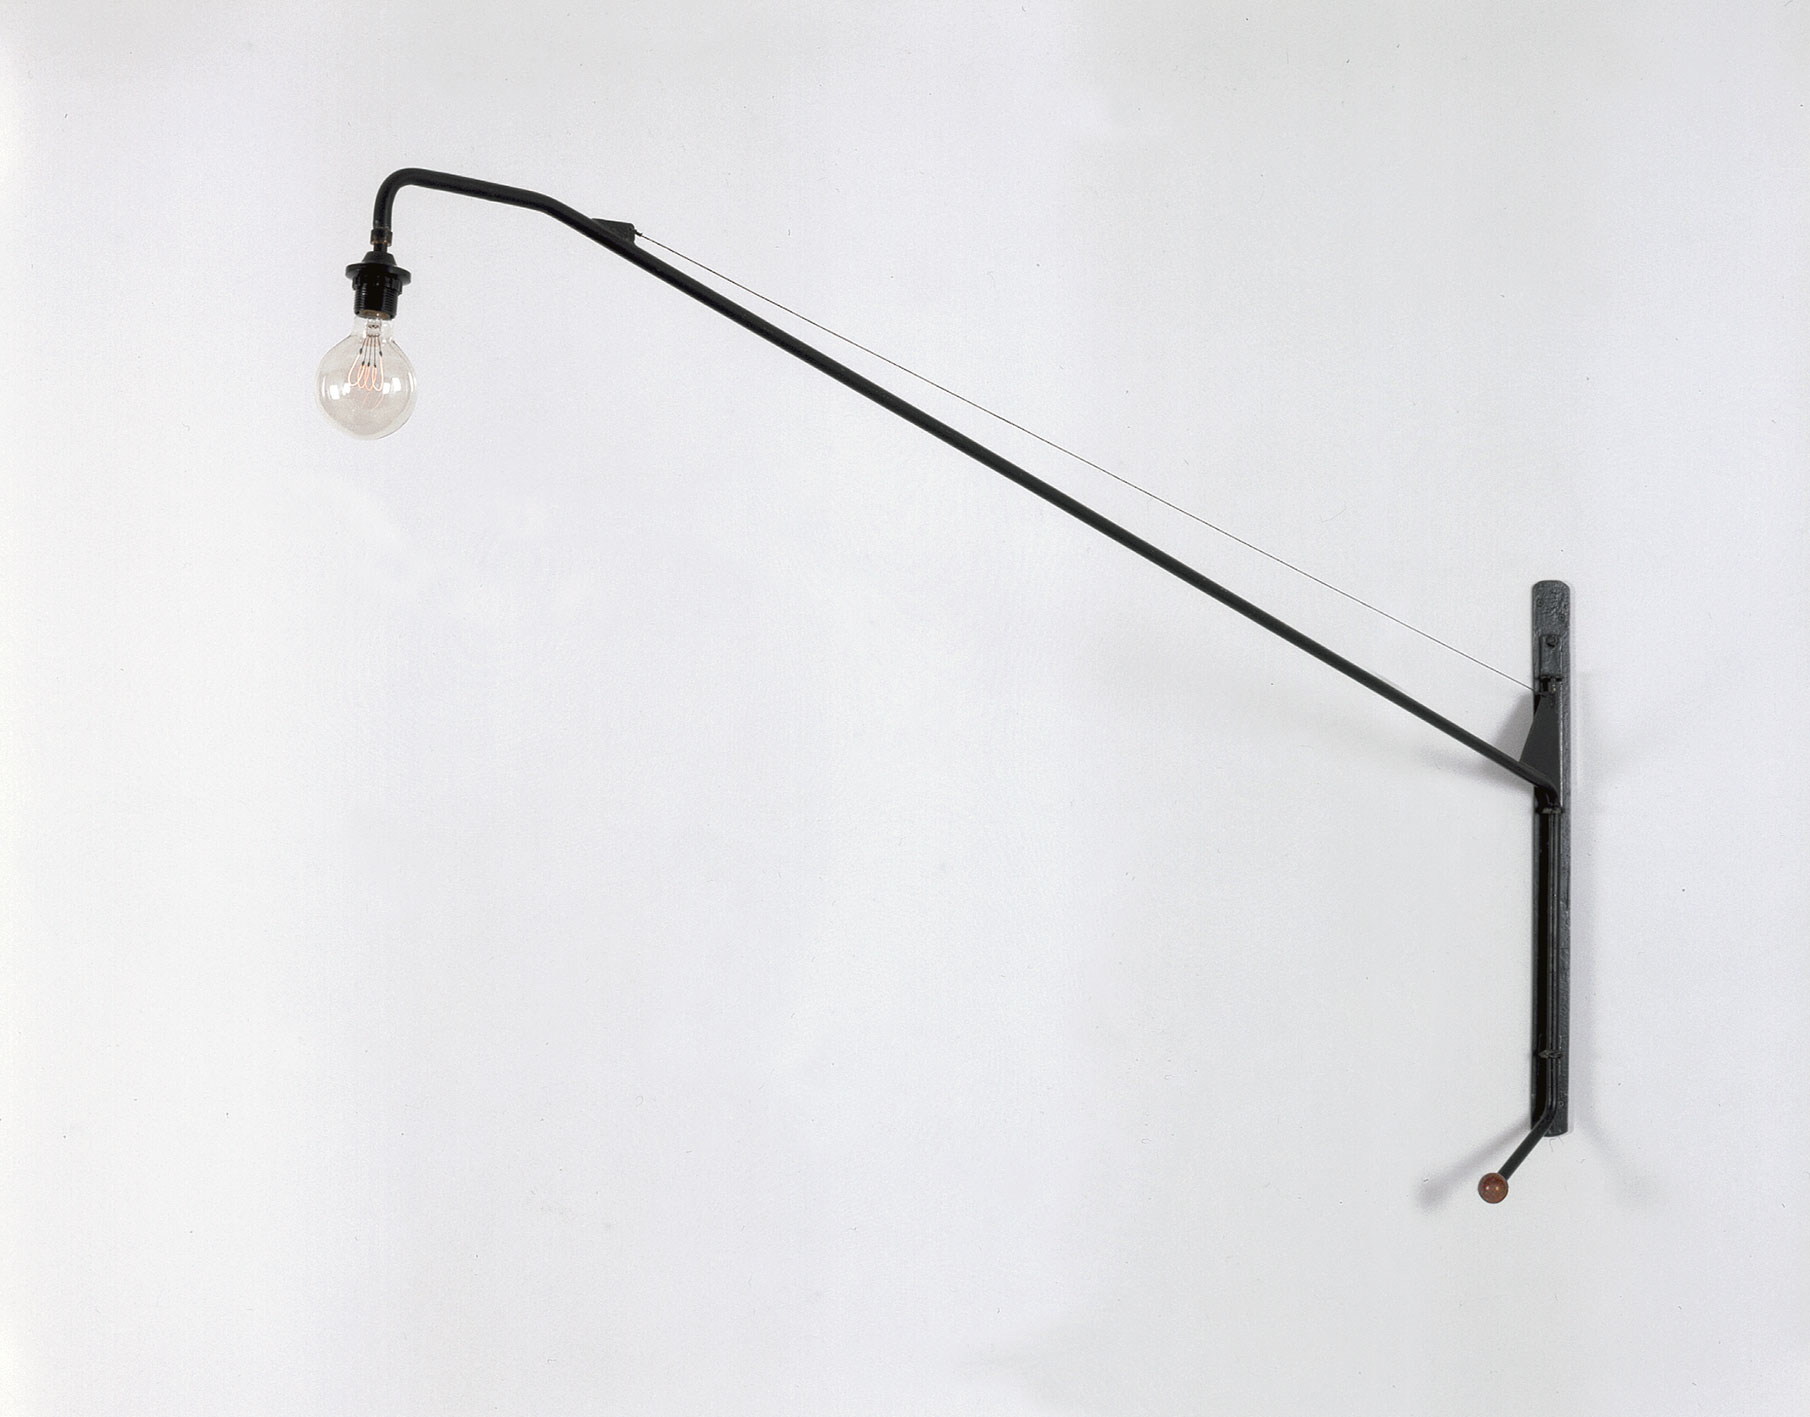 Swing-jib lamp no. 602, with handle for orientation and adjustment, variant with an oblique curved arm, for Air France building, Brazzaville, 1952.